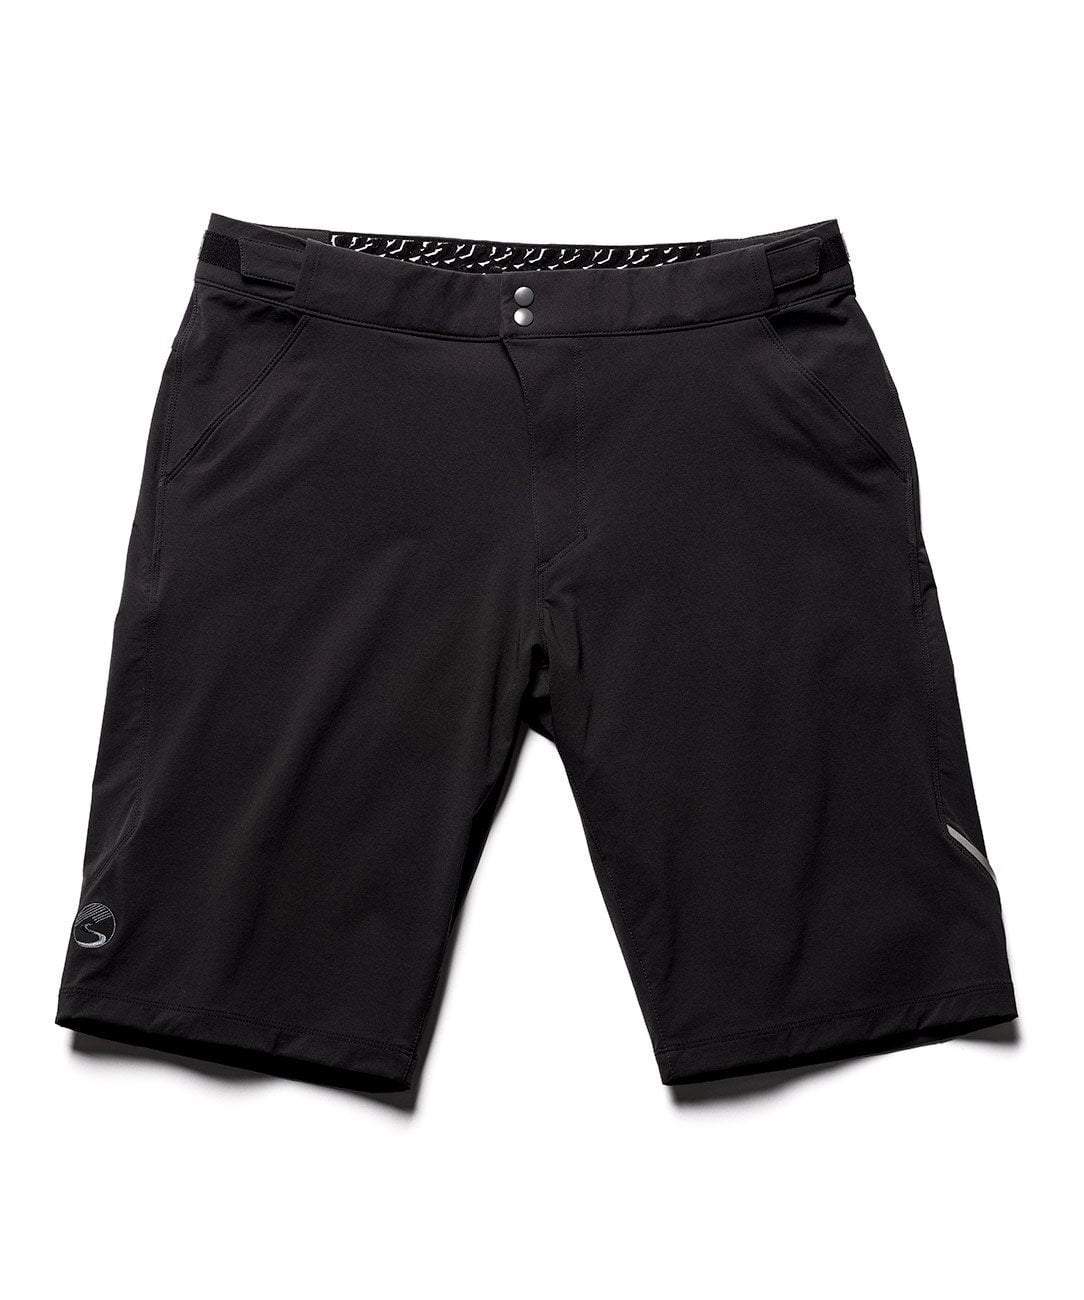 Men's Cross Country DWR 11.5" Shorts